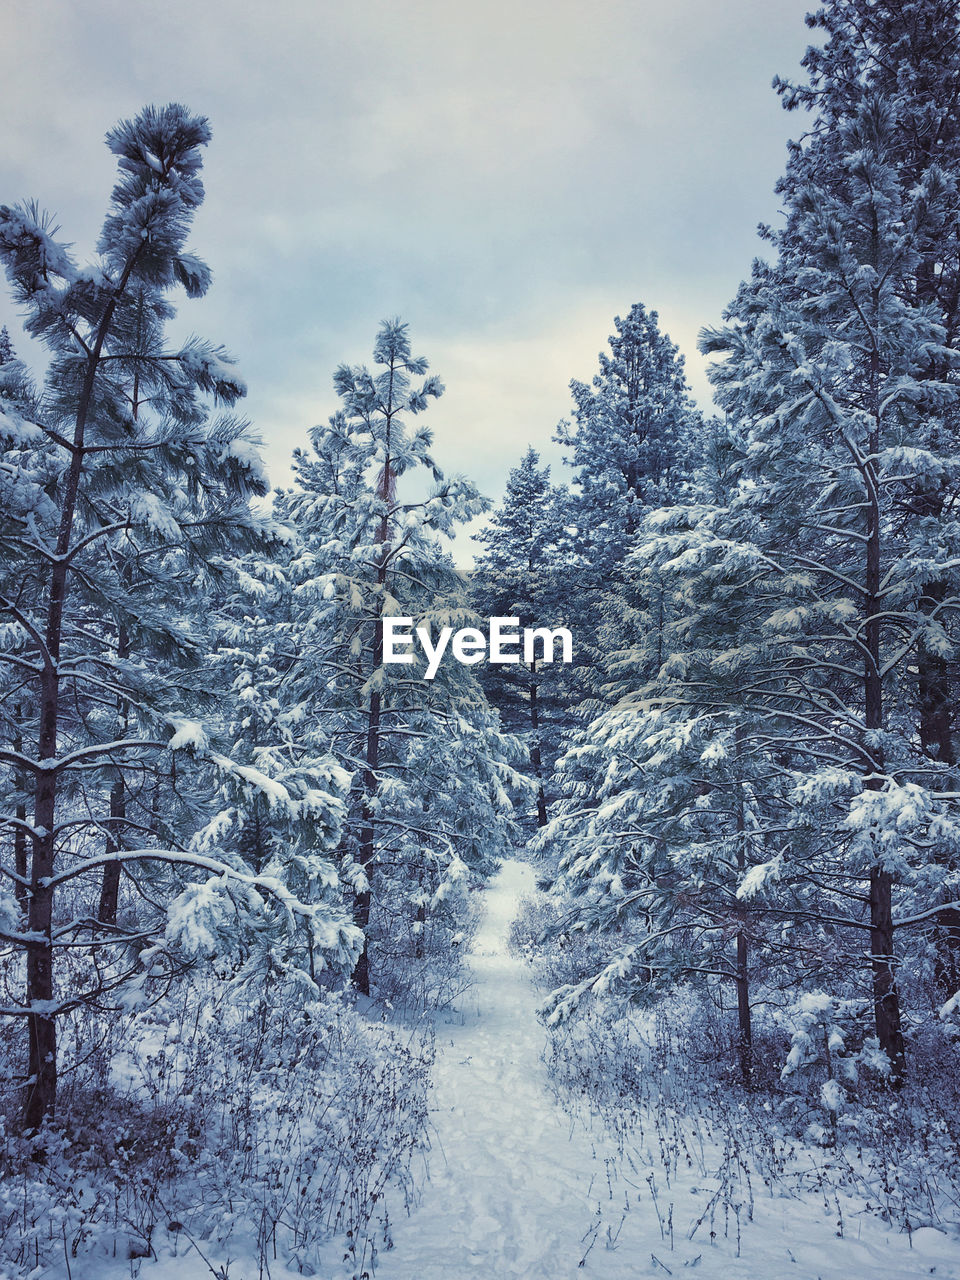 Snow covered evergreen forest on a cold winter day with a walking path in the middle